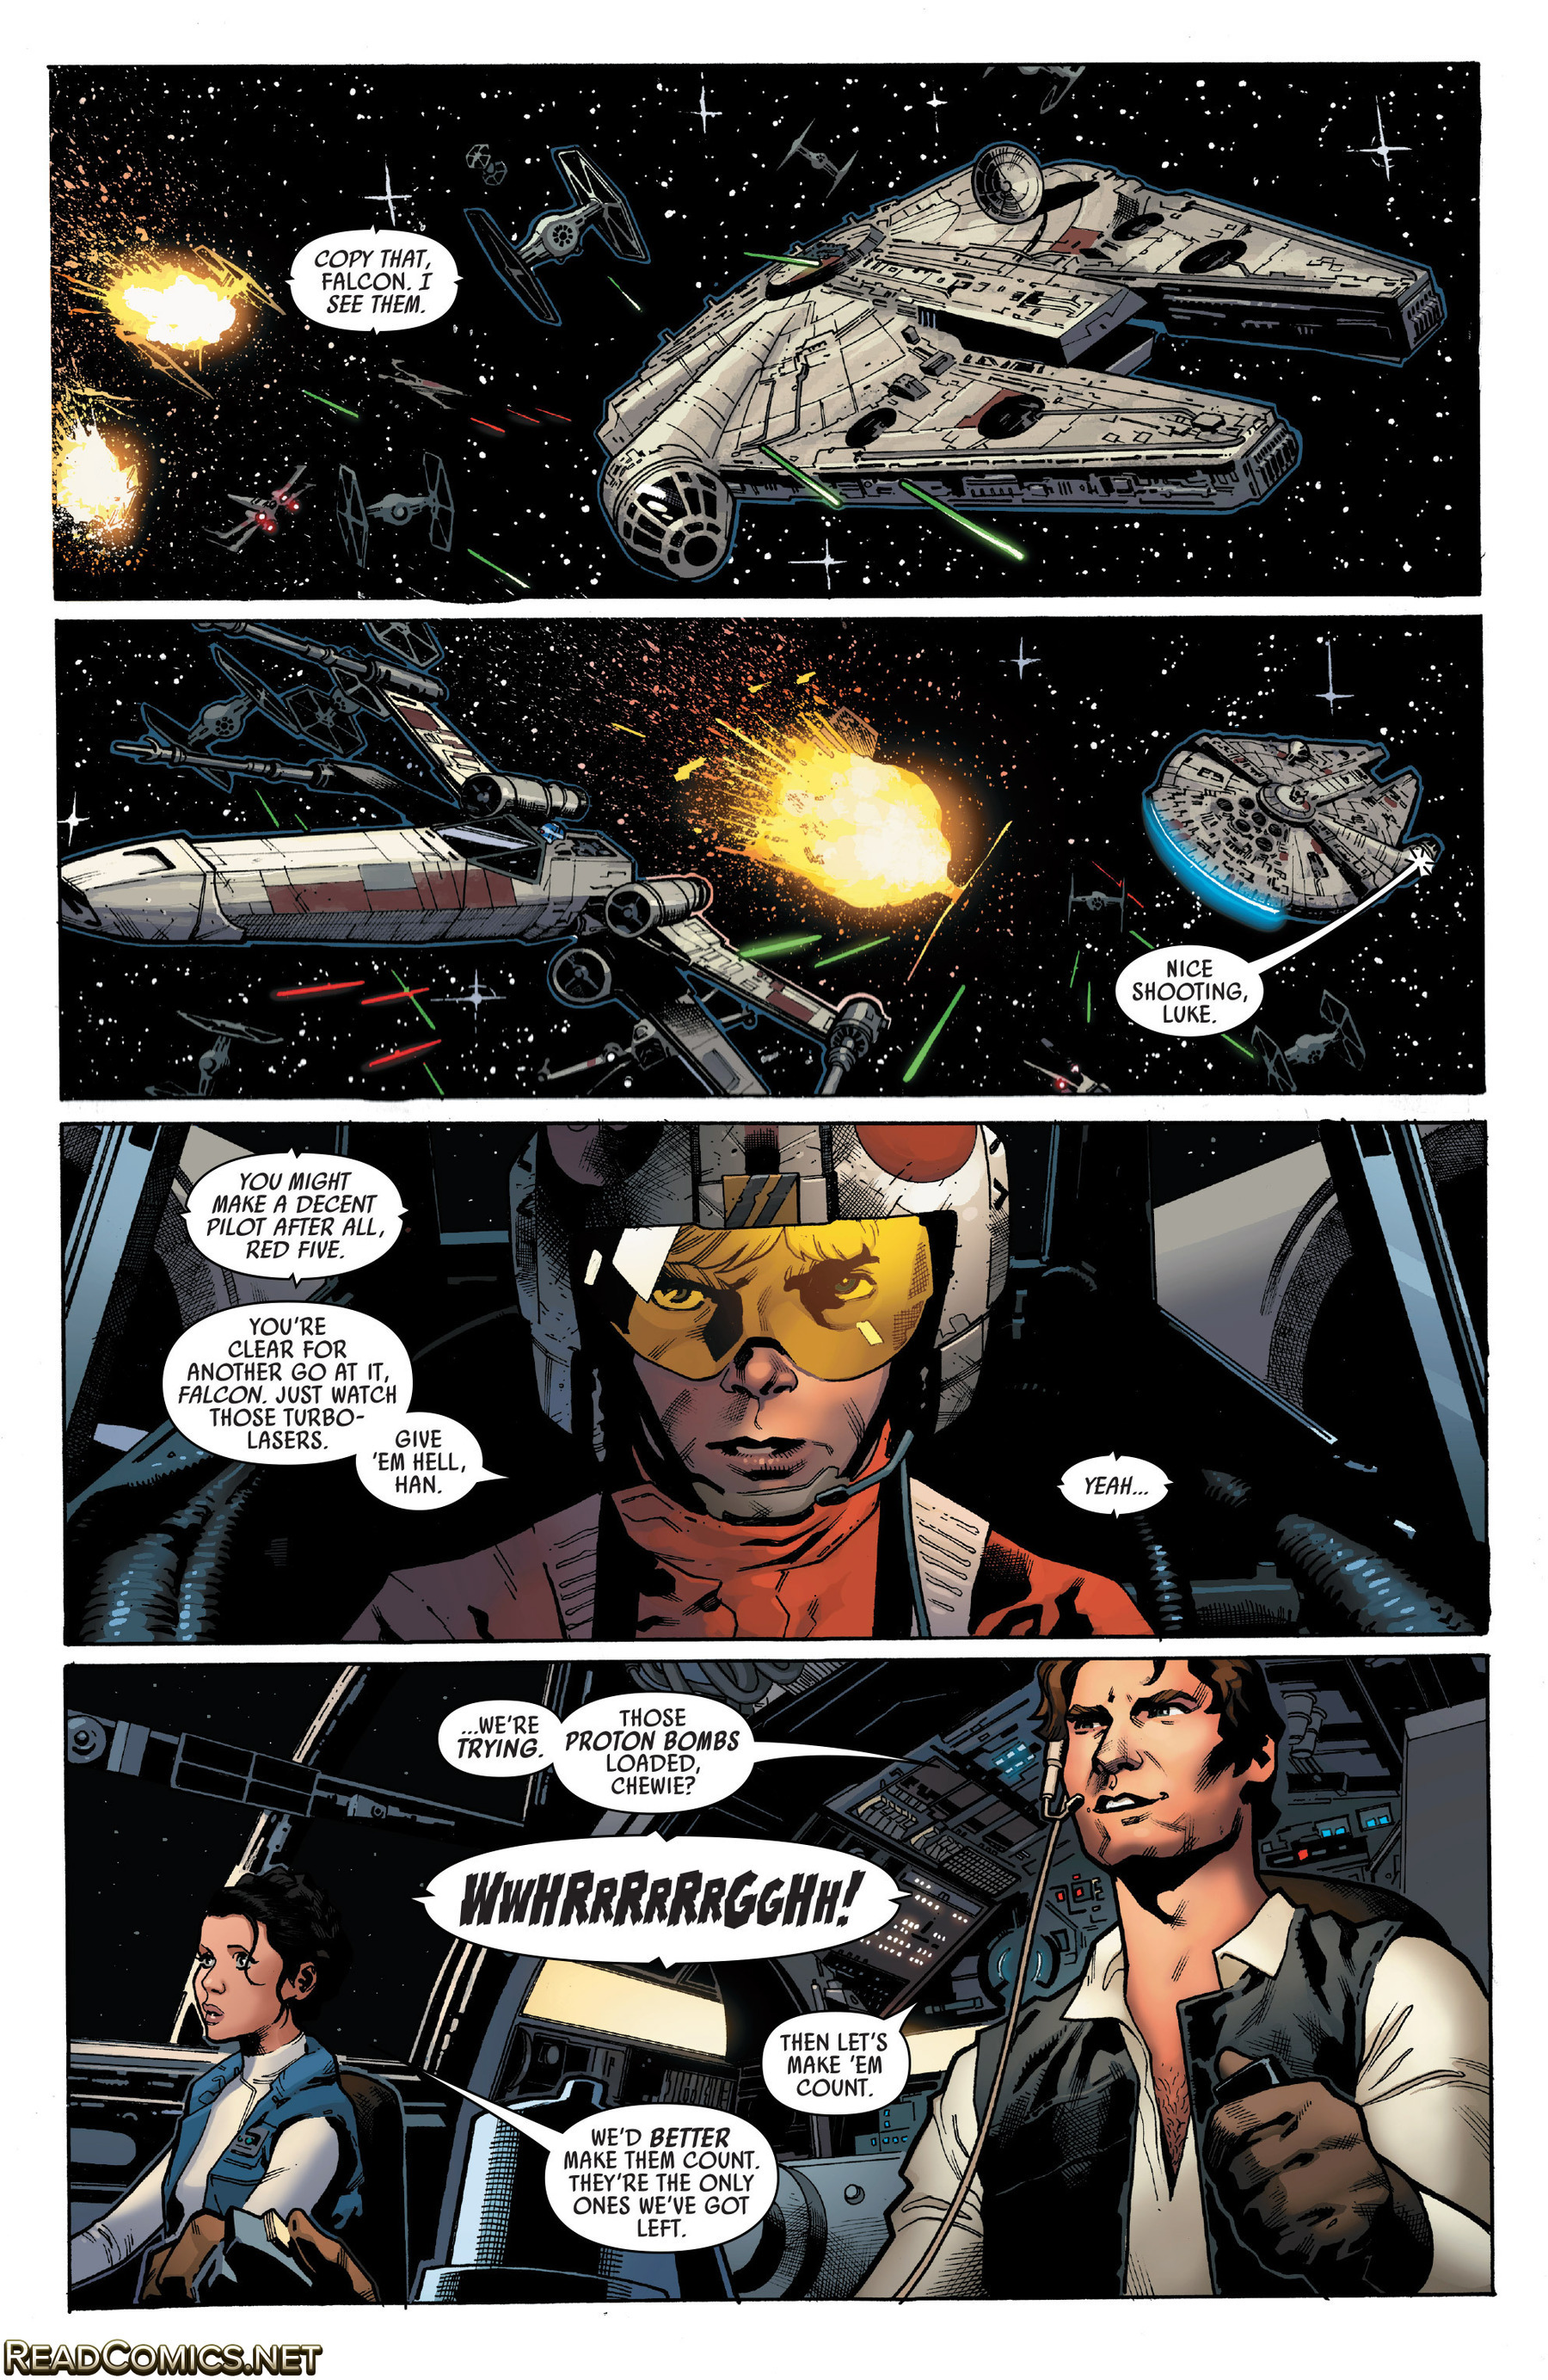 Star Wars (2015-): Chapter 22 - Page 4